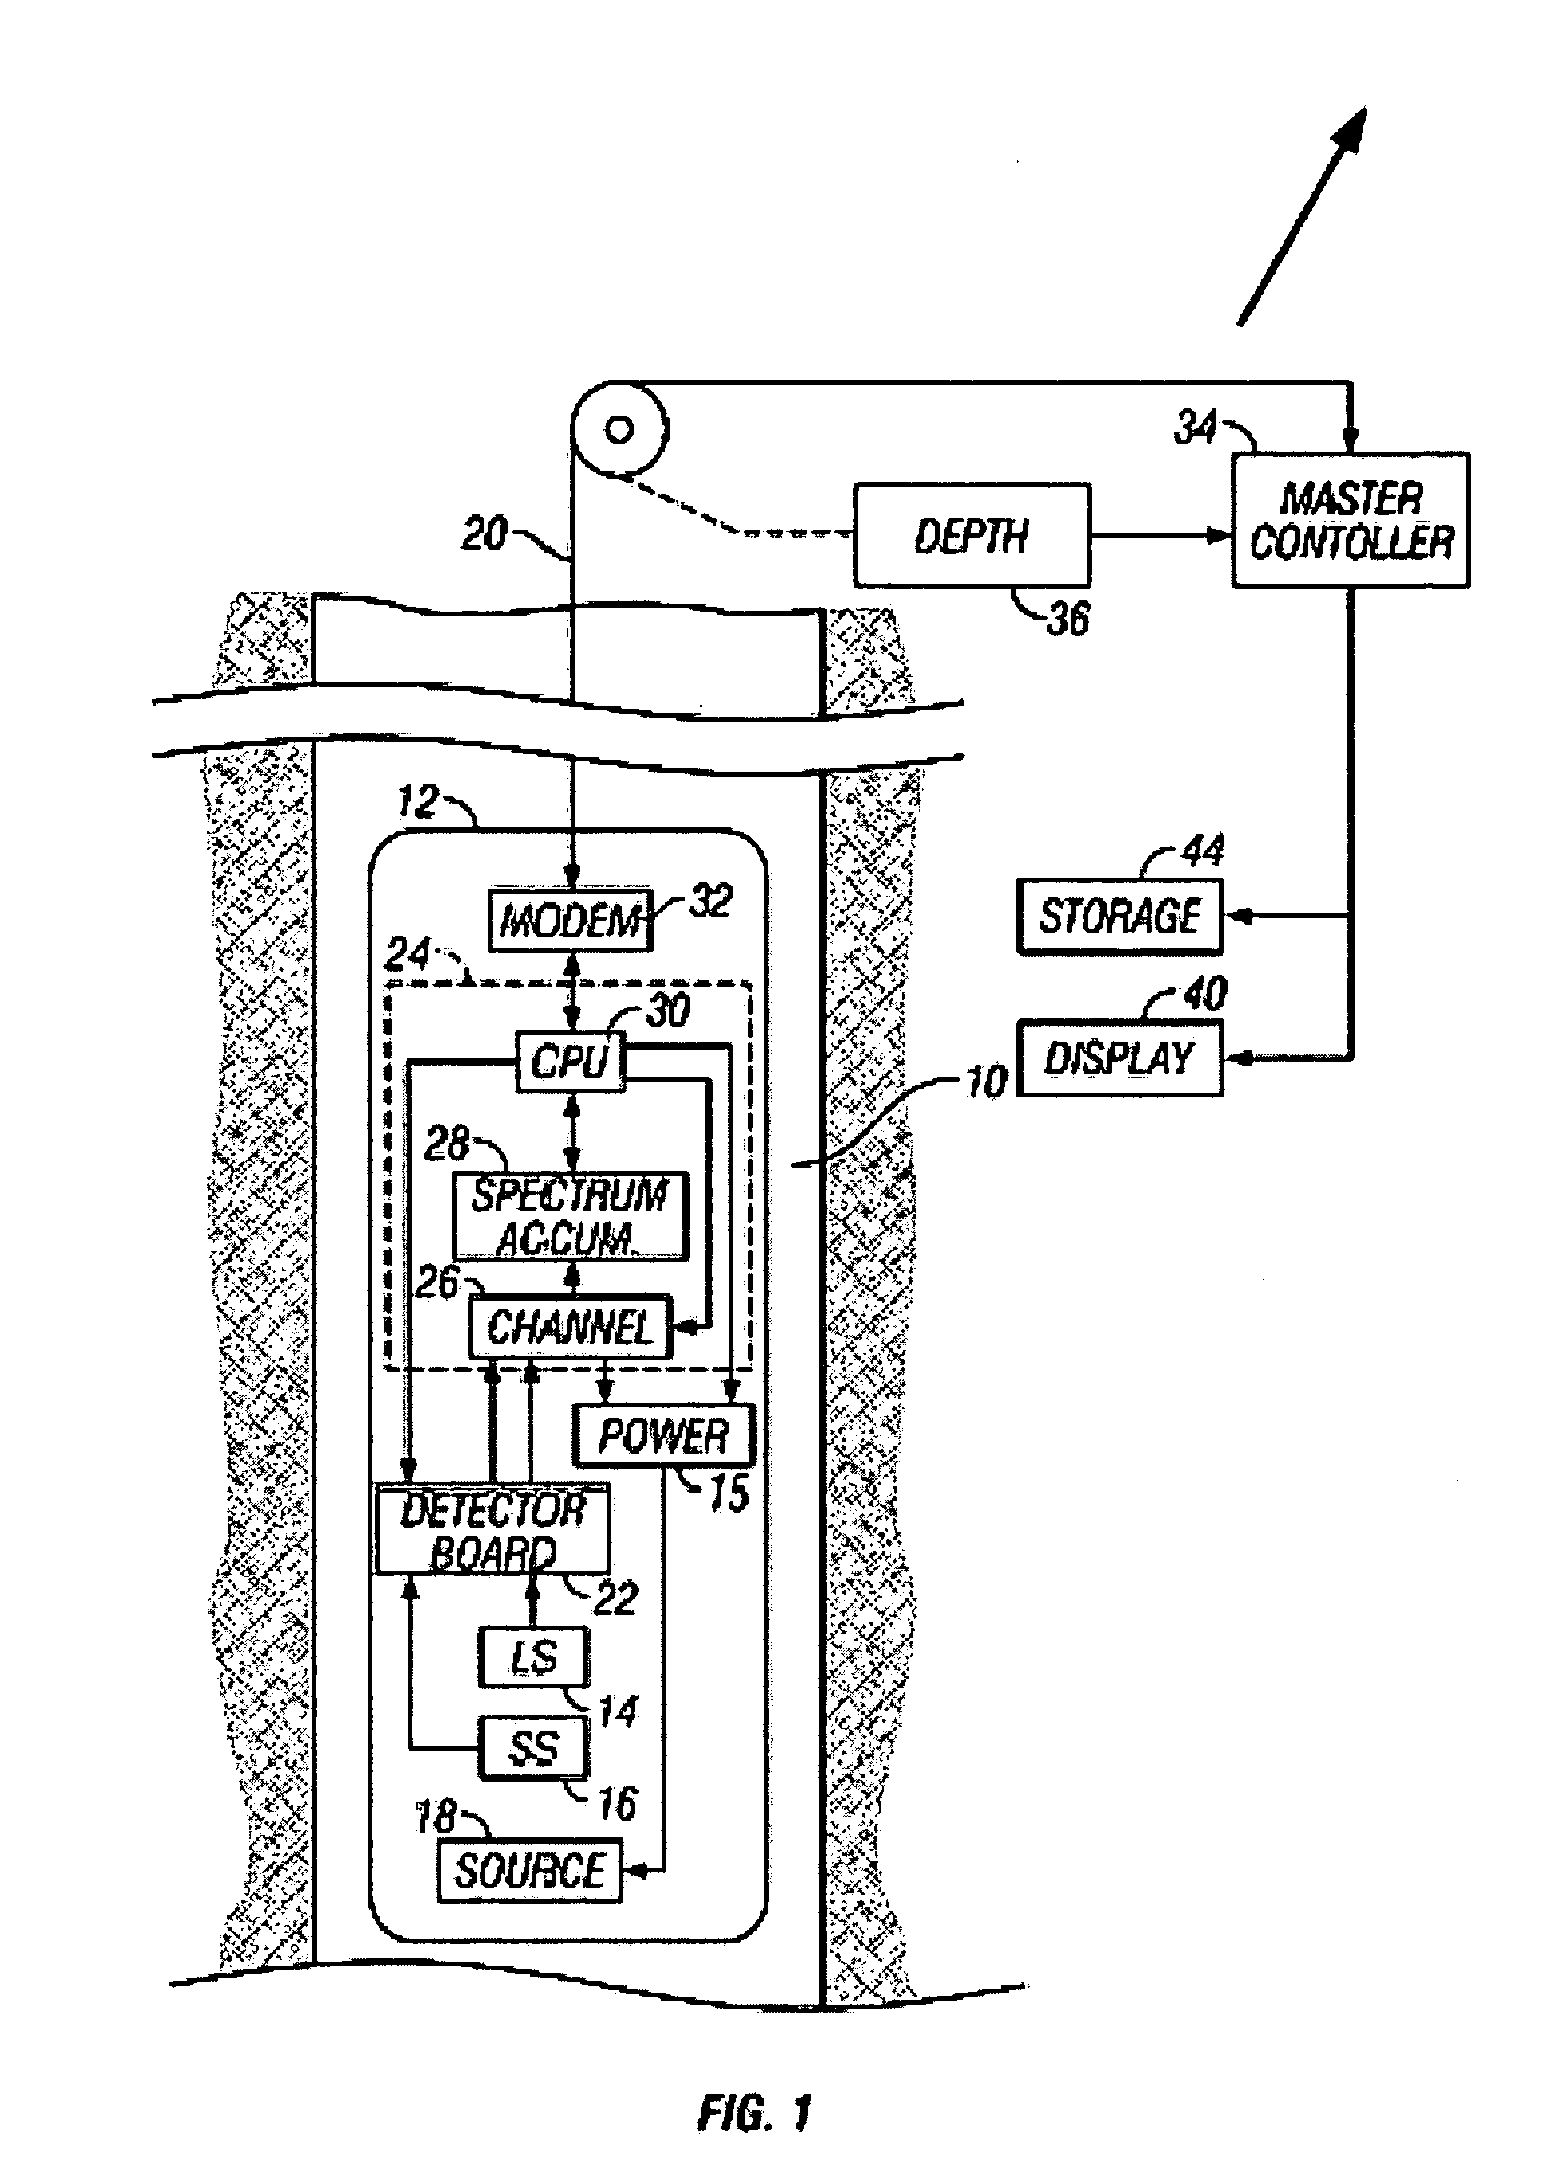 Method and apparatus for determining aluminum concentration in earth formations